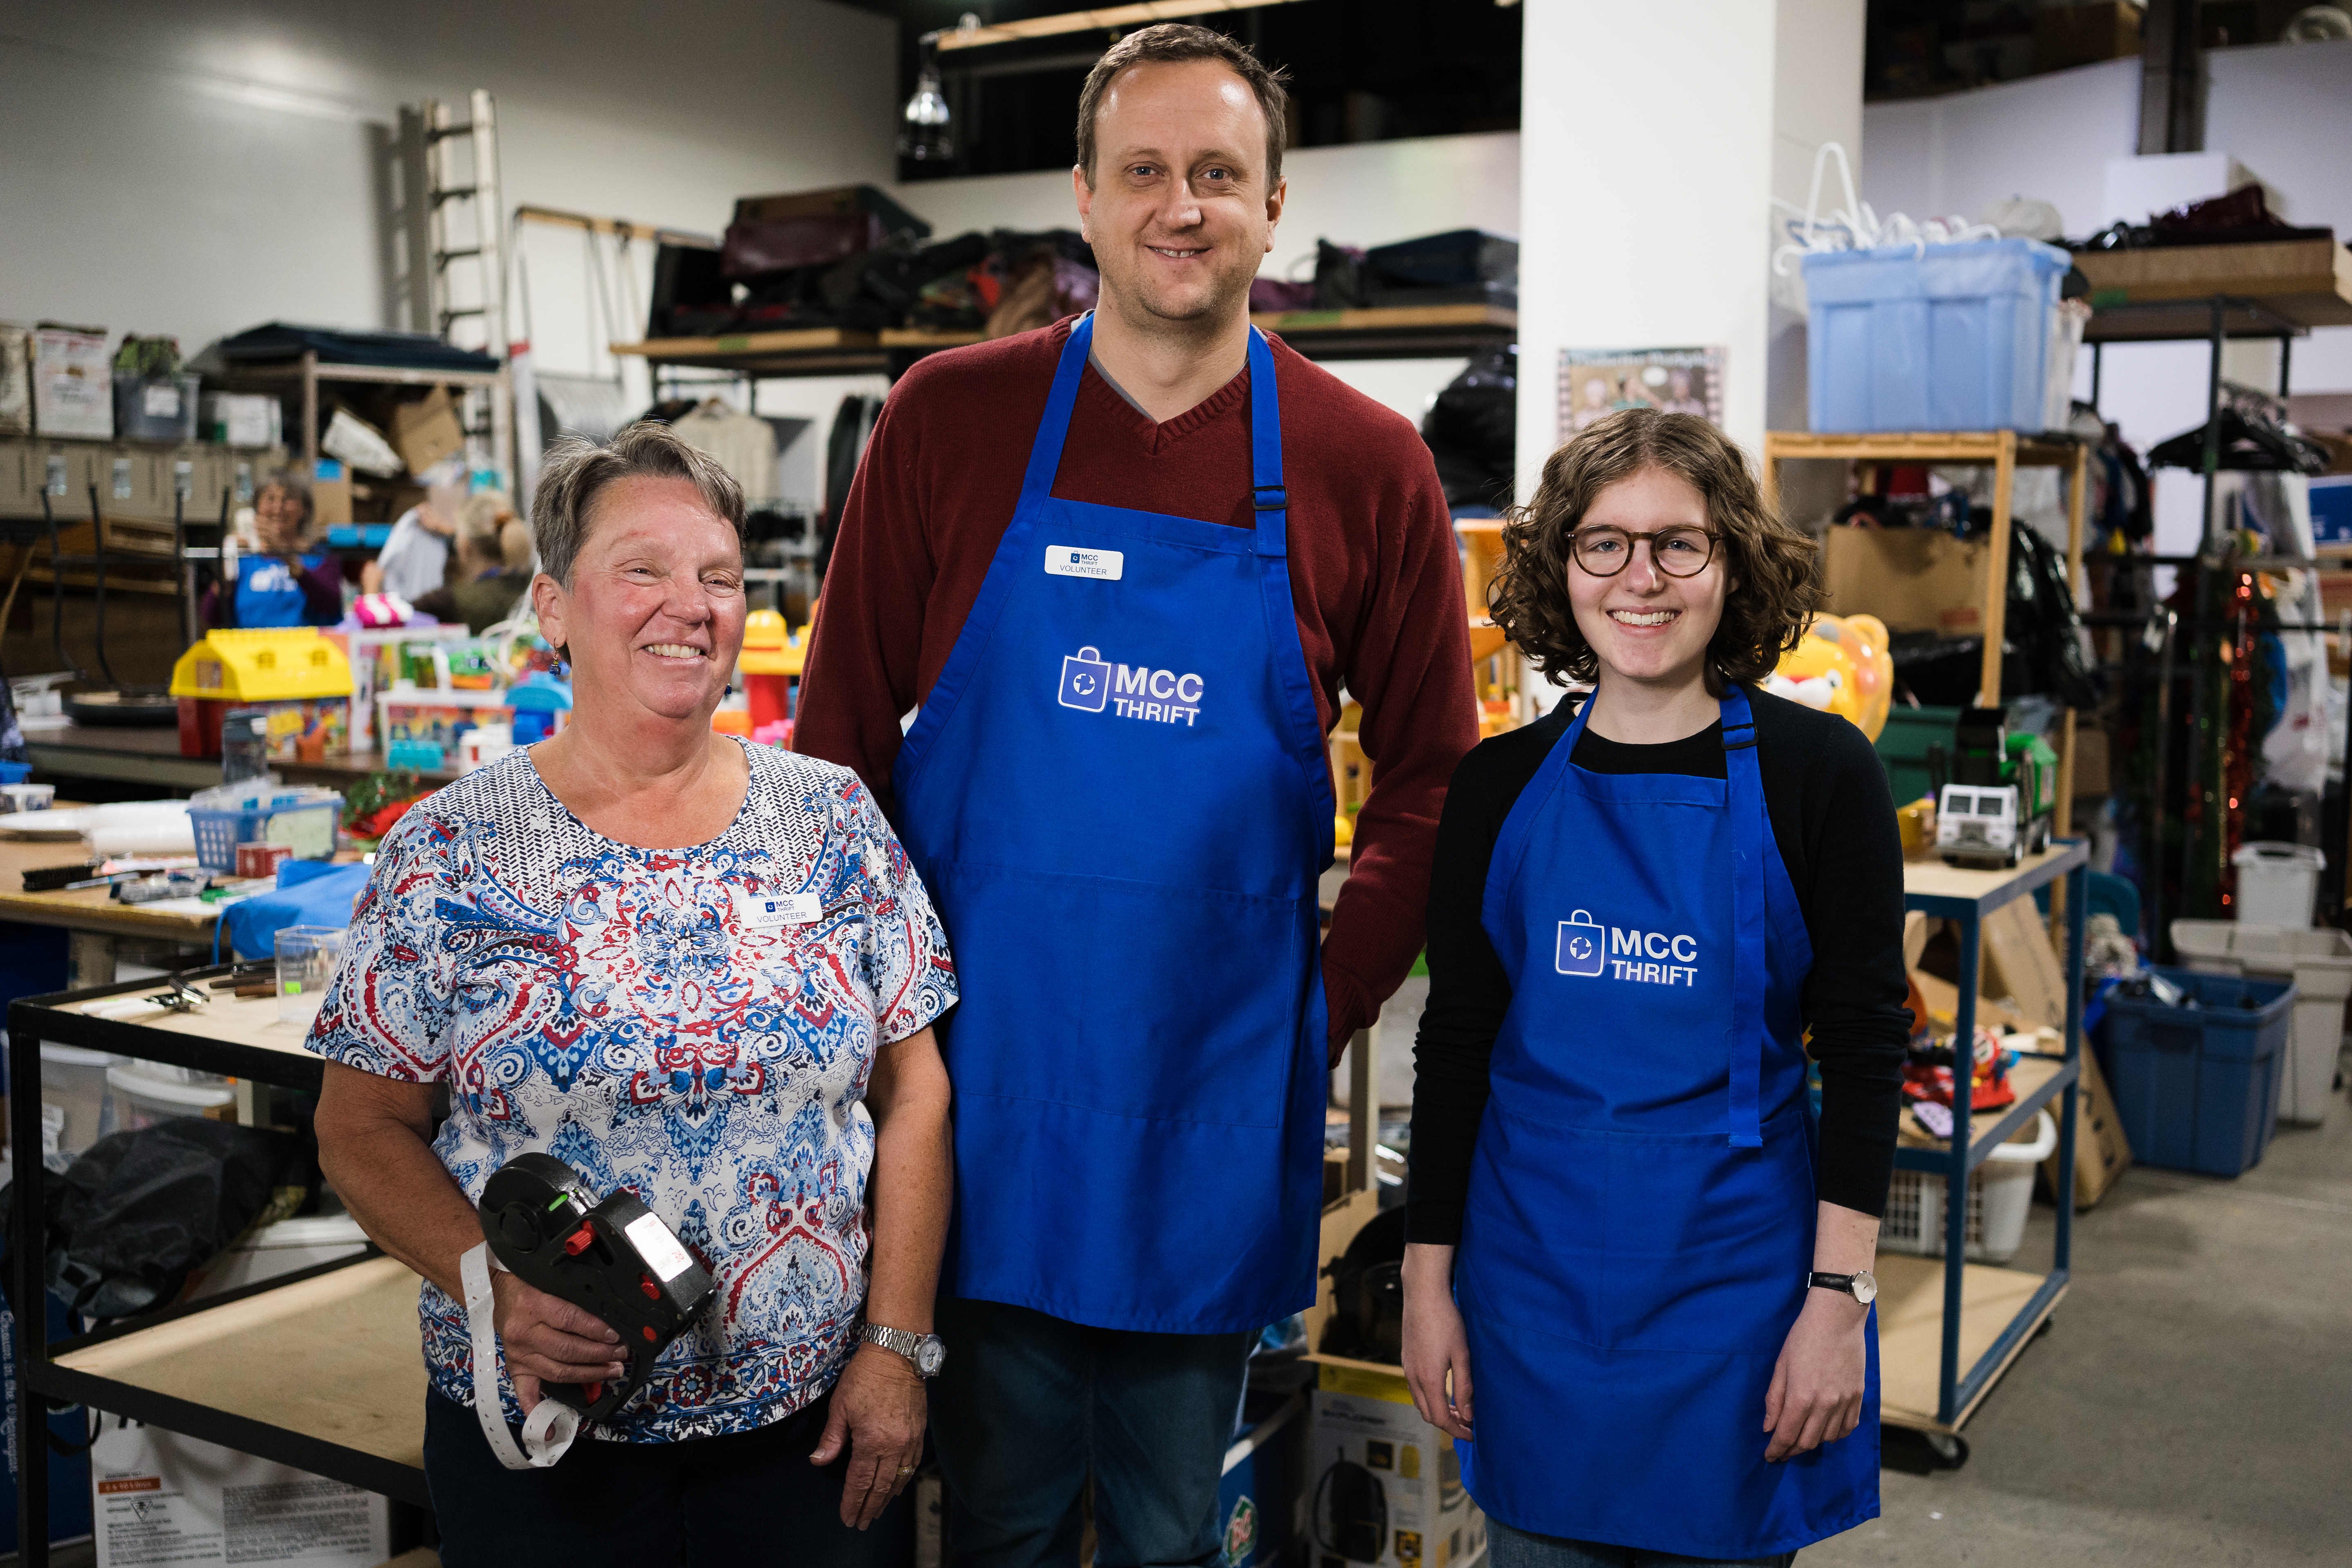 Volunteers Janice Wiggins (left), Alexander Germann (middle) and Lucia Dück (right) in the donation department of the Edmonton MCC Thrift Shop.